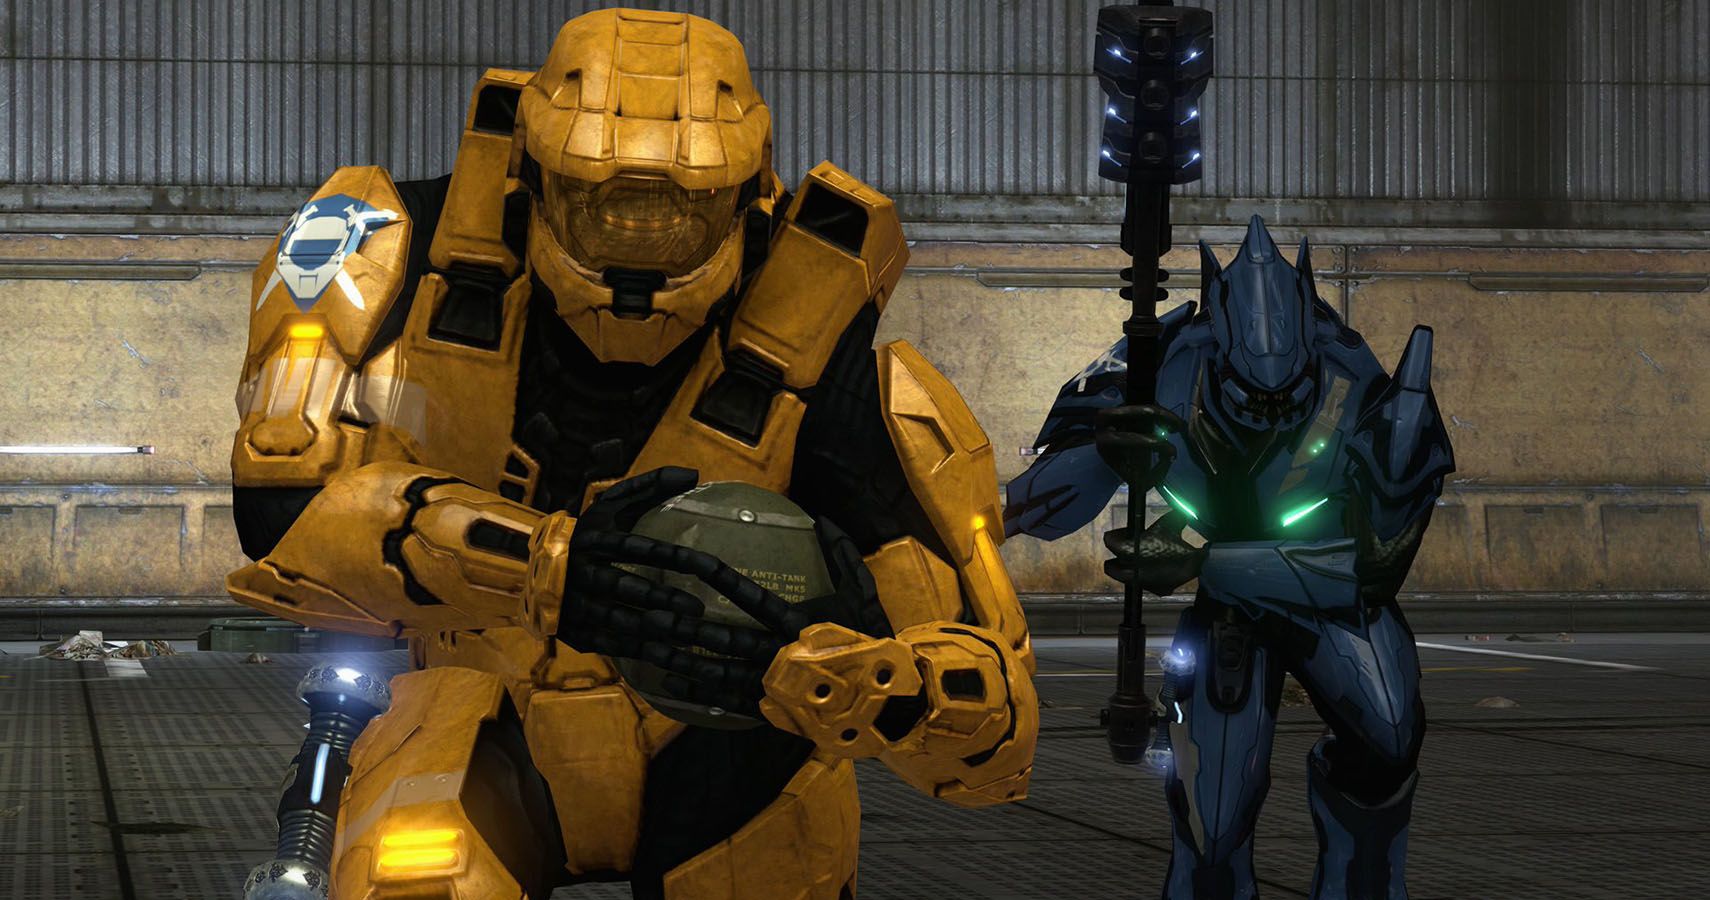 Screenshot of Grifball as shared by the official Halo Twitter account